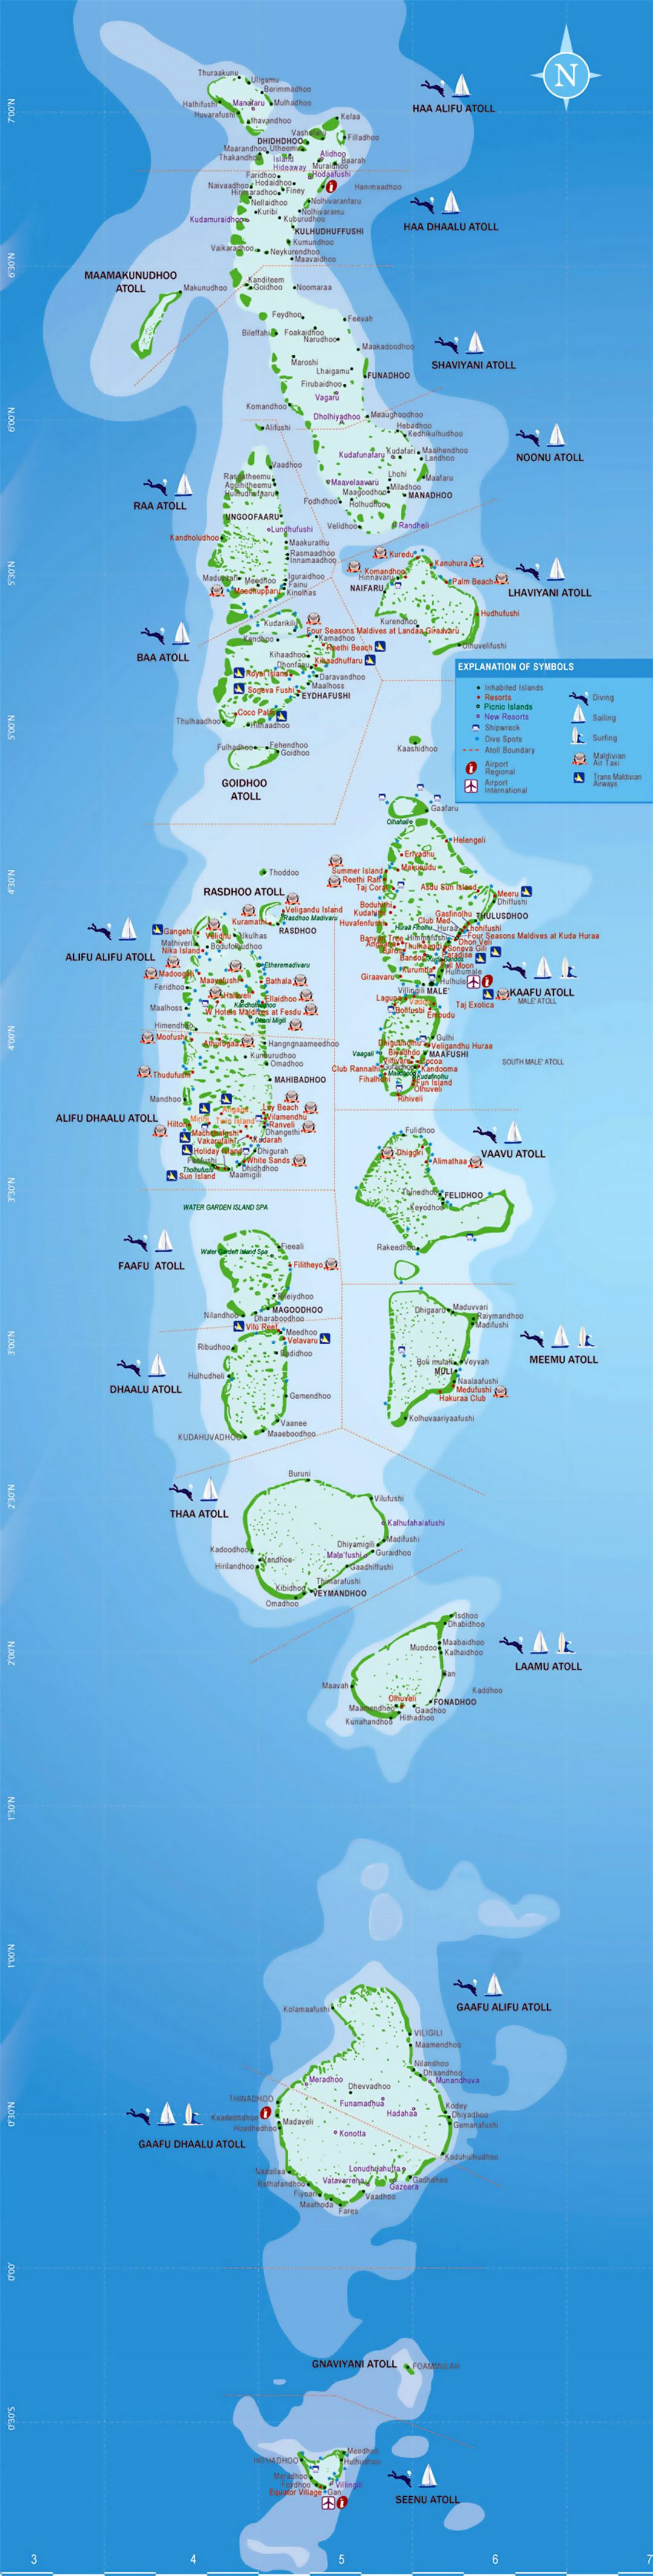 Large map of Maldives with atolls, resorts and activities details